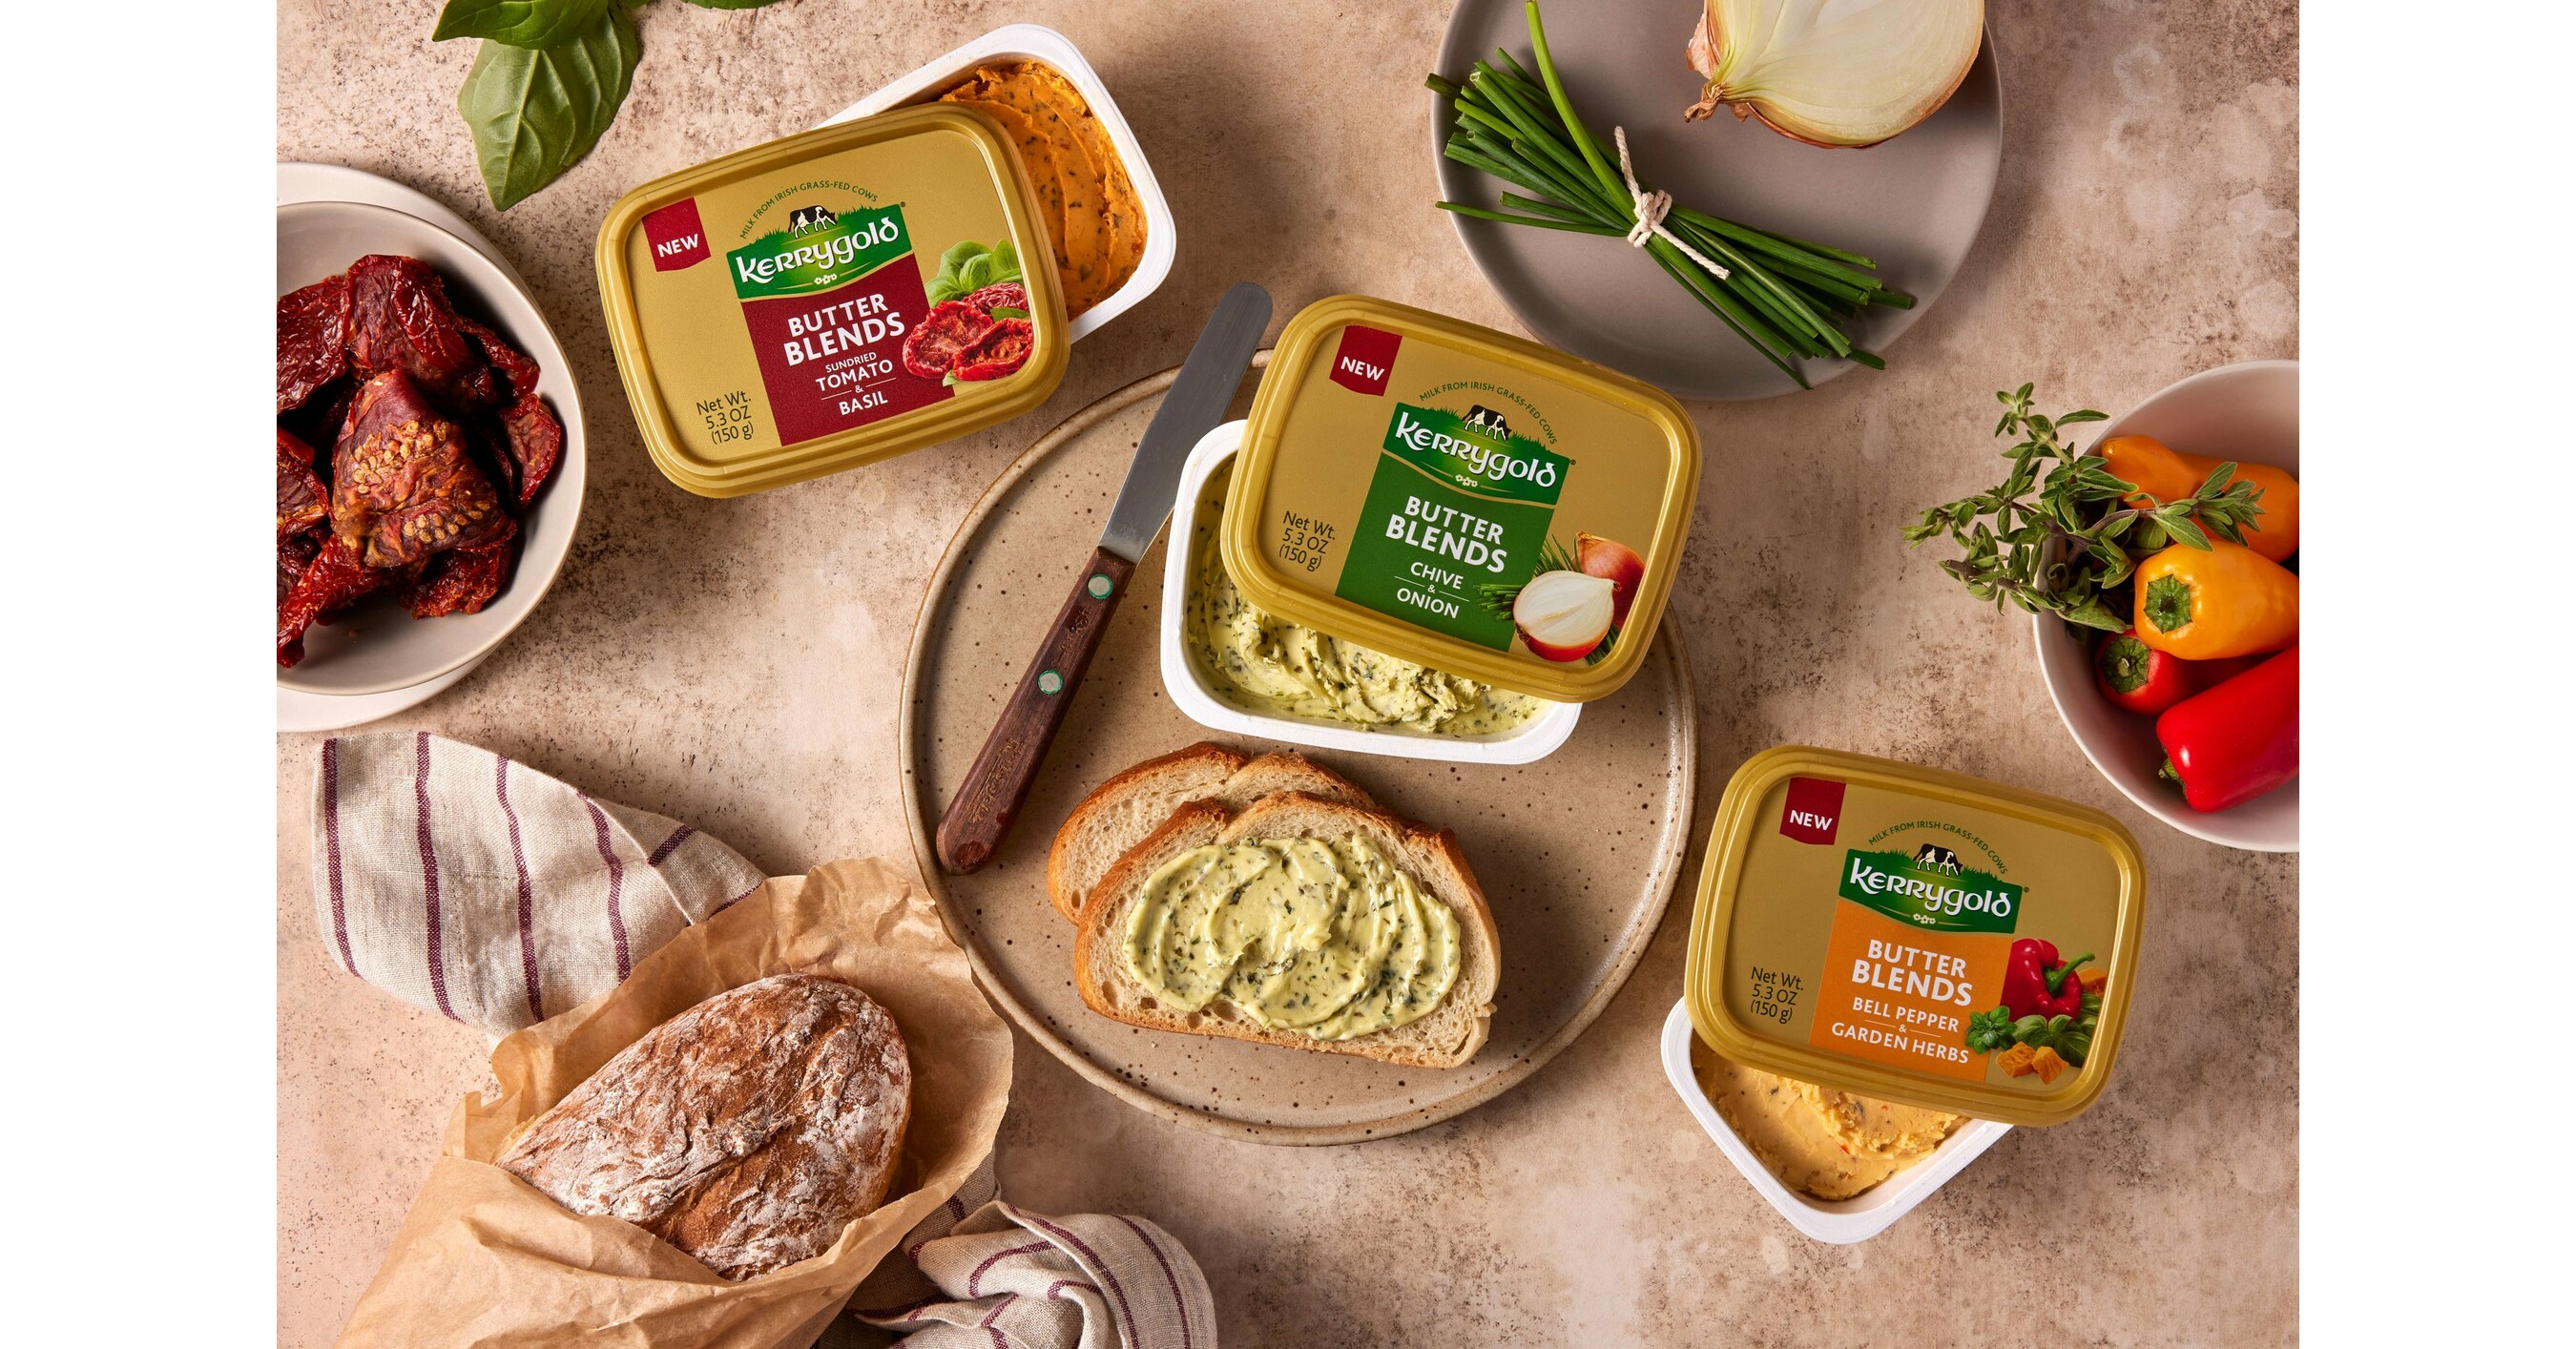 Popular Kerrygold butter varieties return to NY store shelves